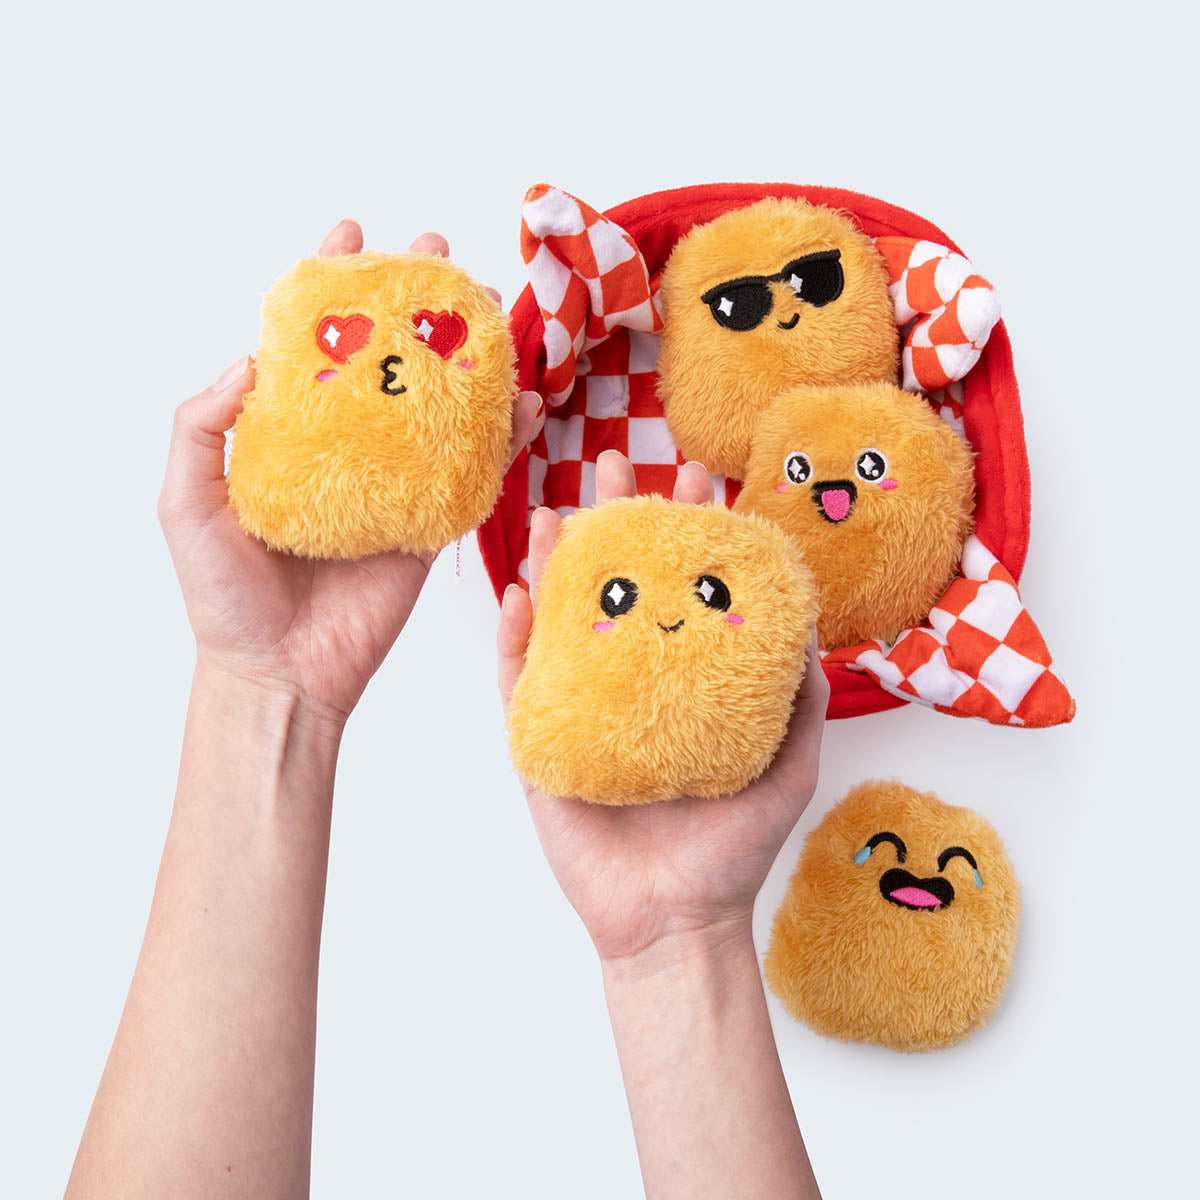  tinysiry Funny Emotional Support Nuggets Plush,Vibrant